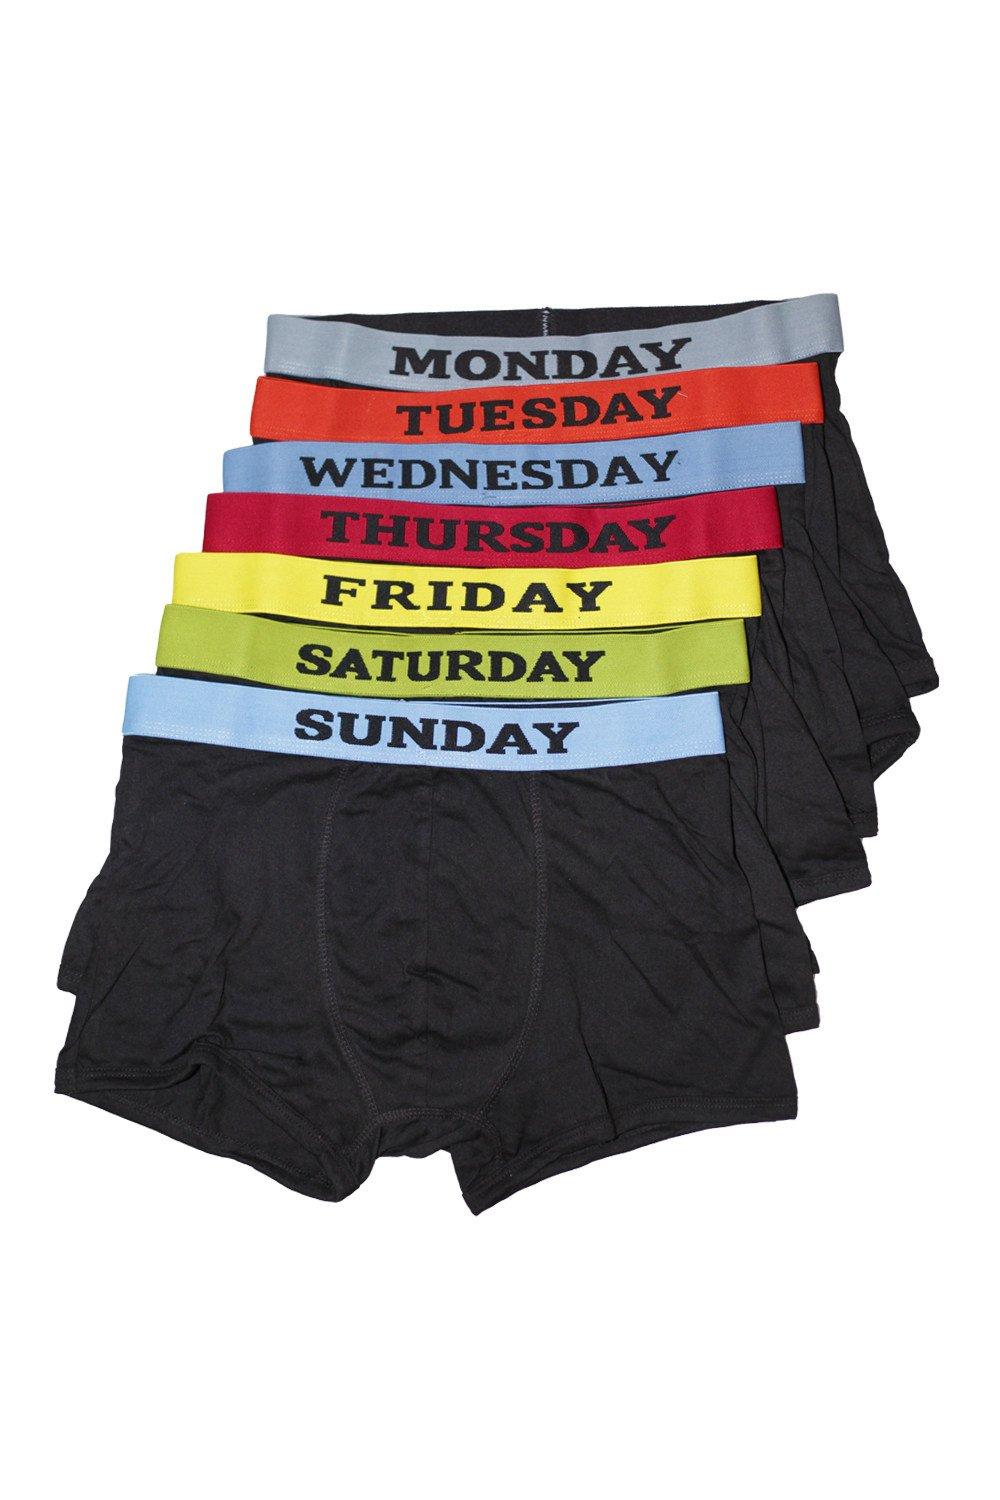 Days Of The Week Boxer Shorts / Underwear (Pack Of 7)